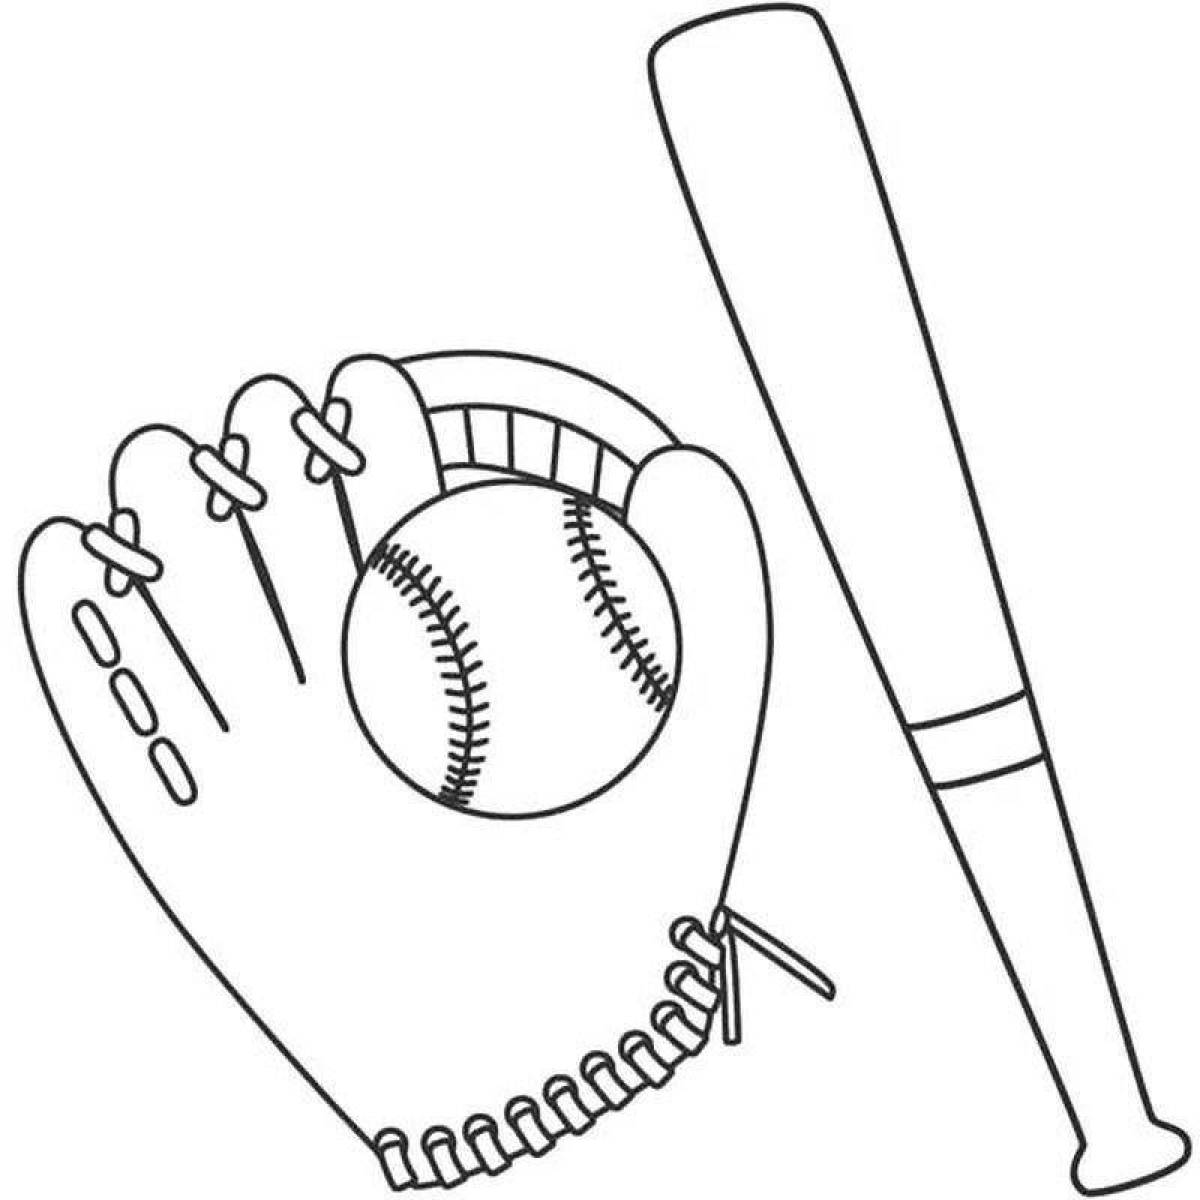 Playful sports equipment coloring page